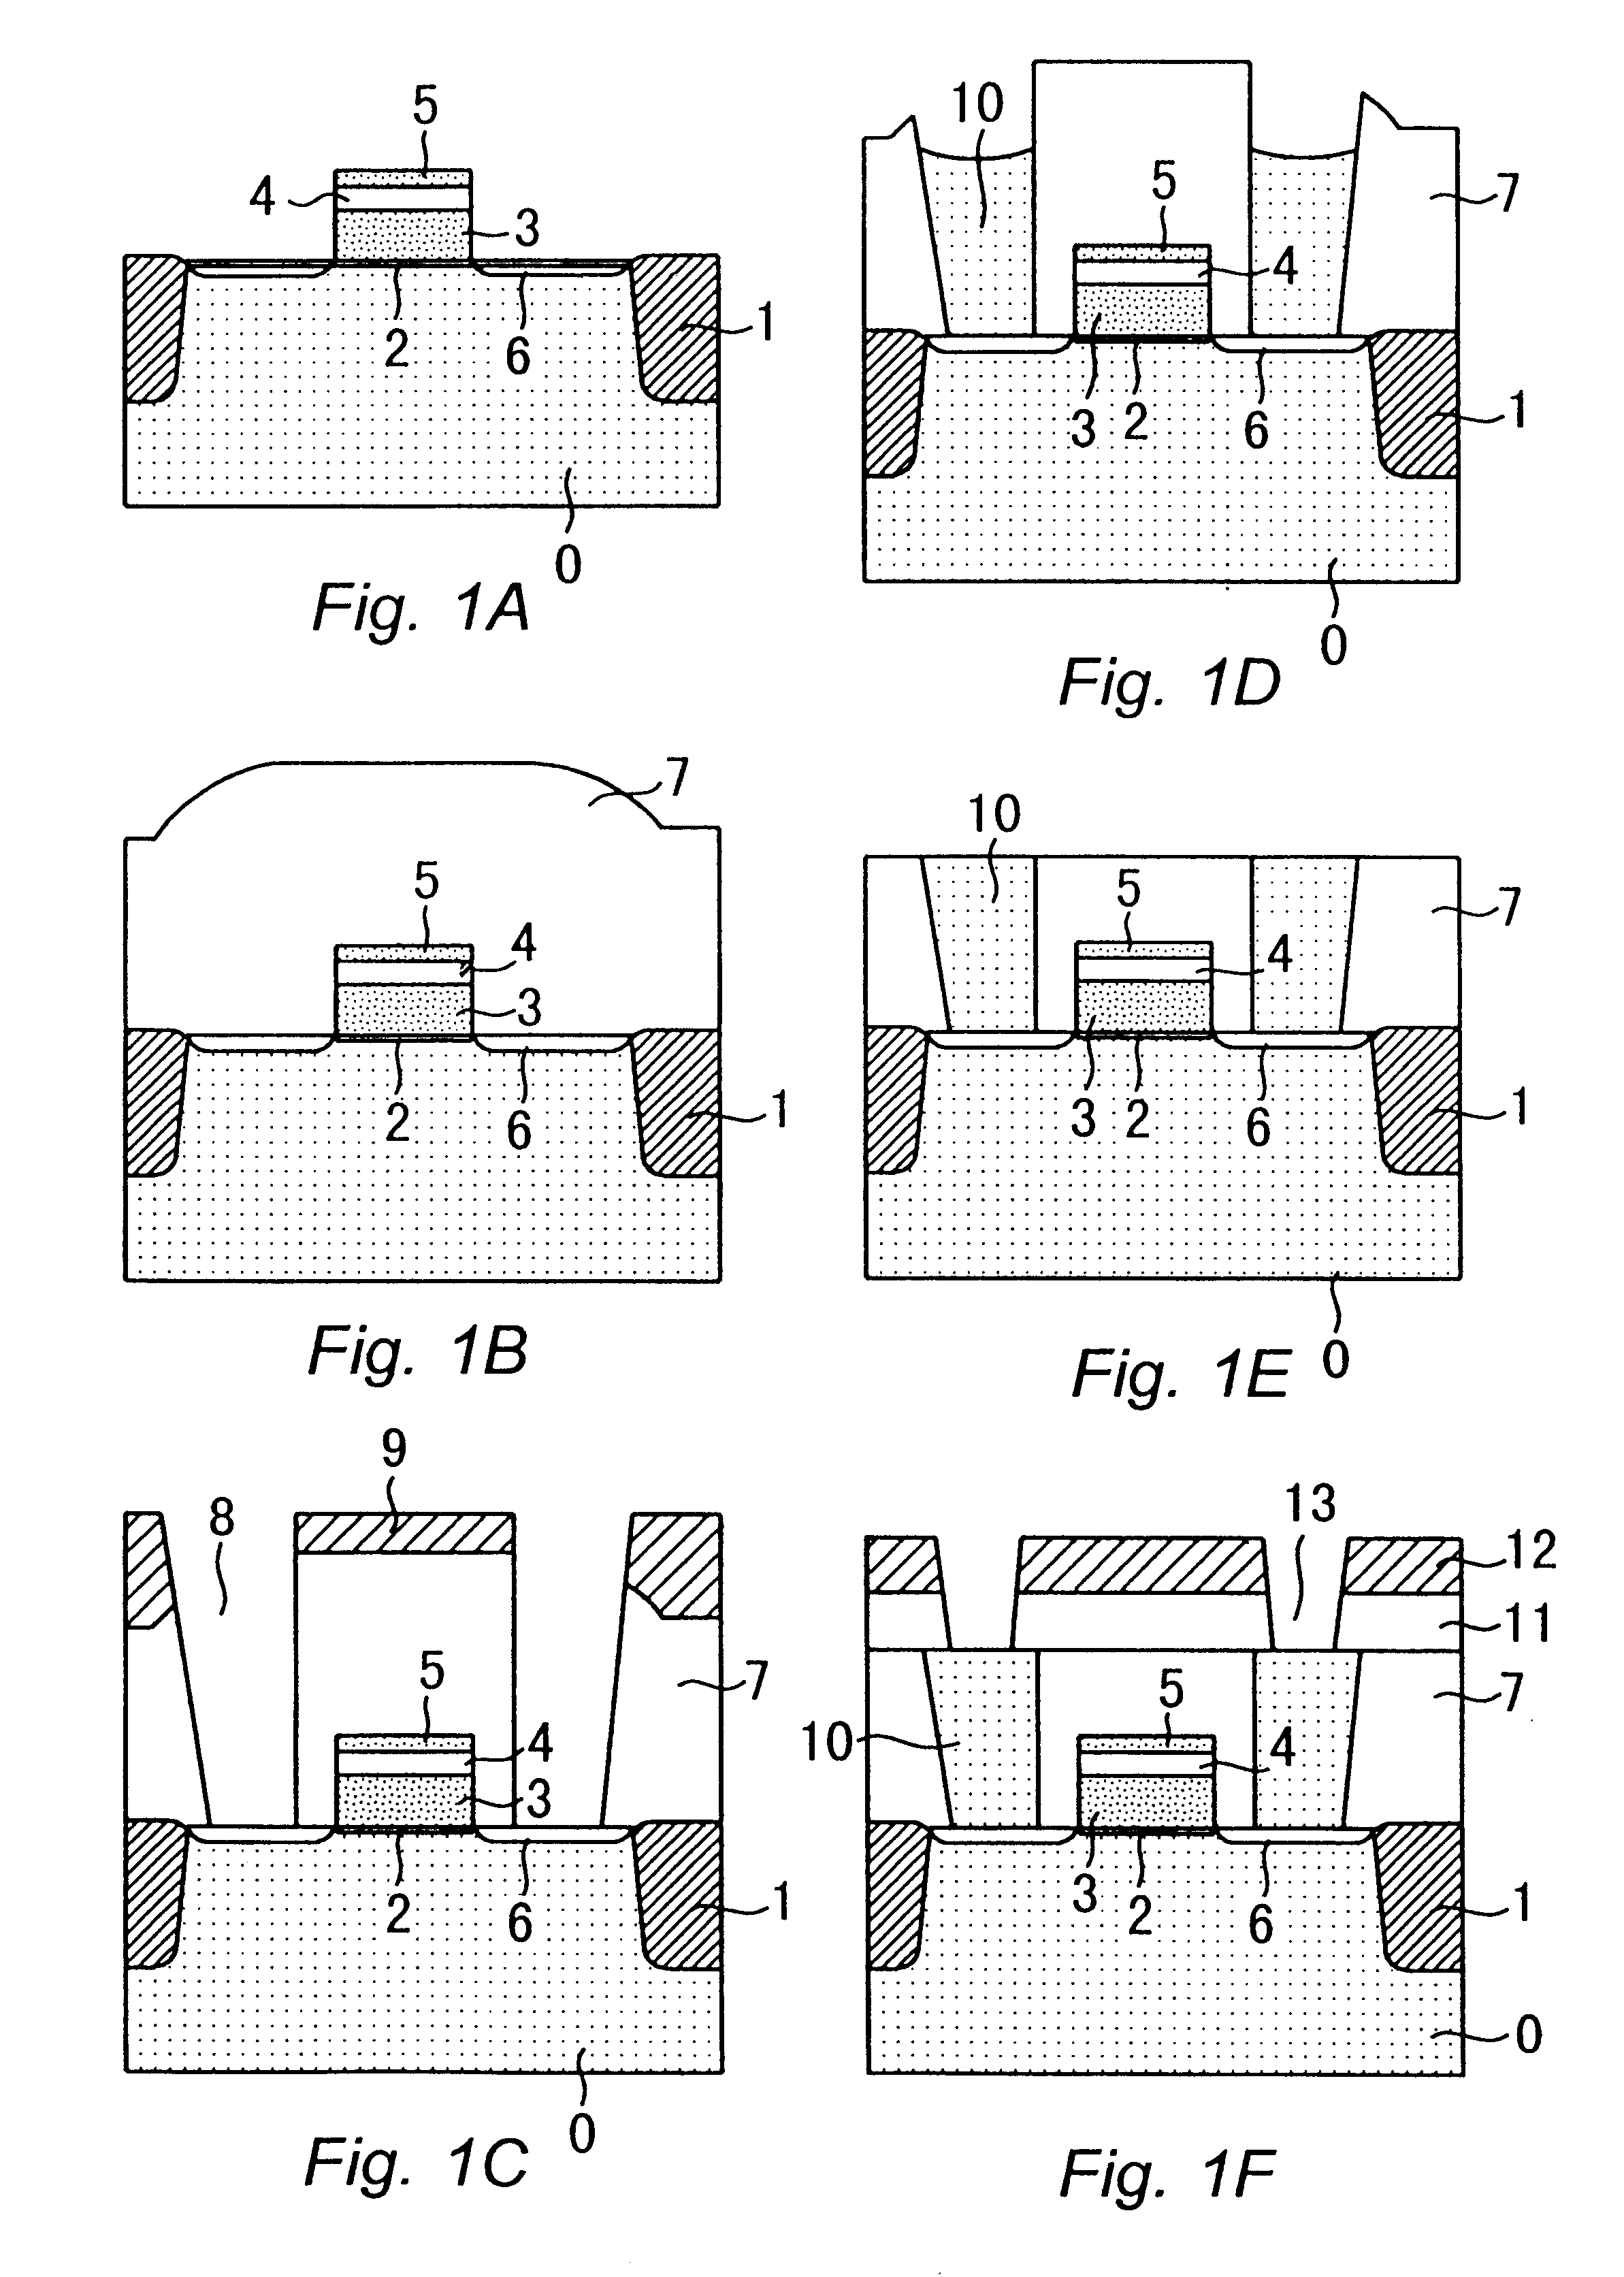 Multilayered semiconductor device